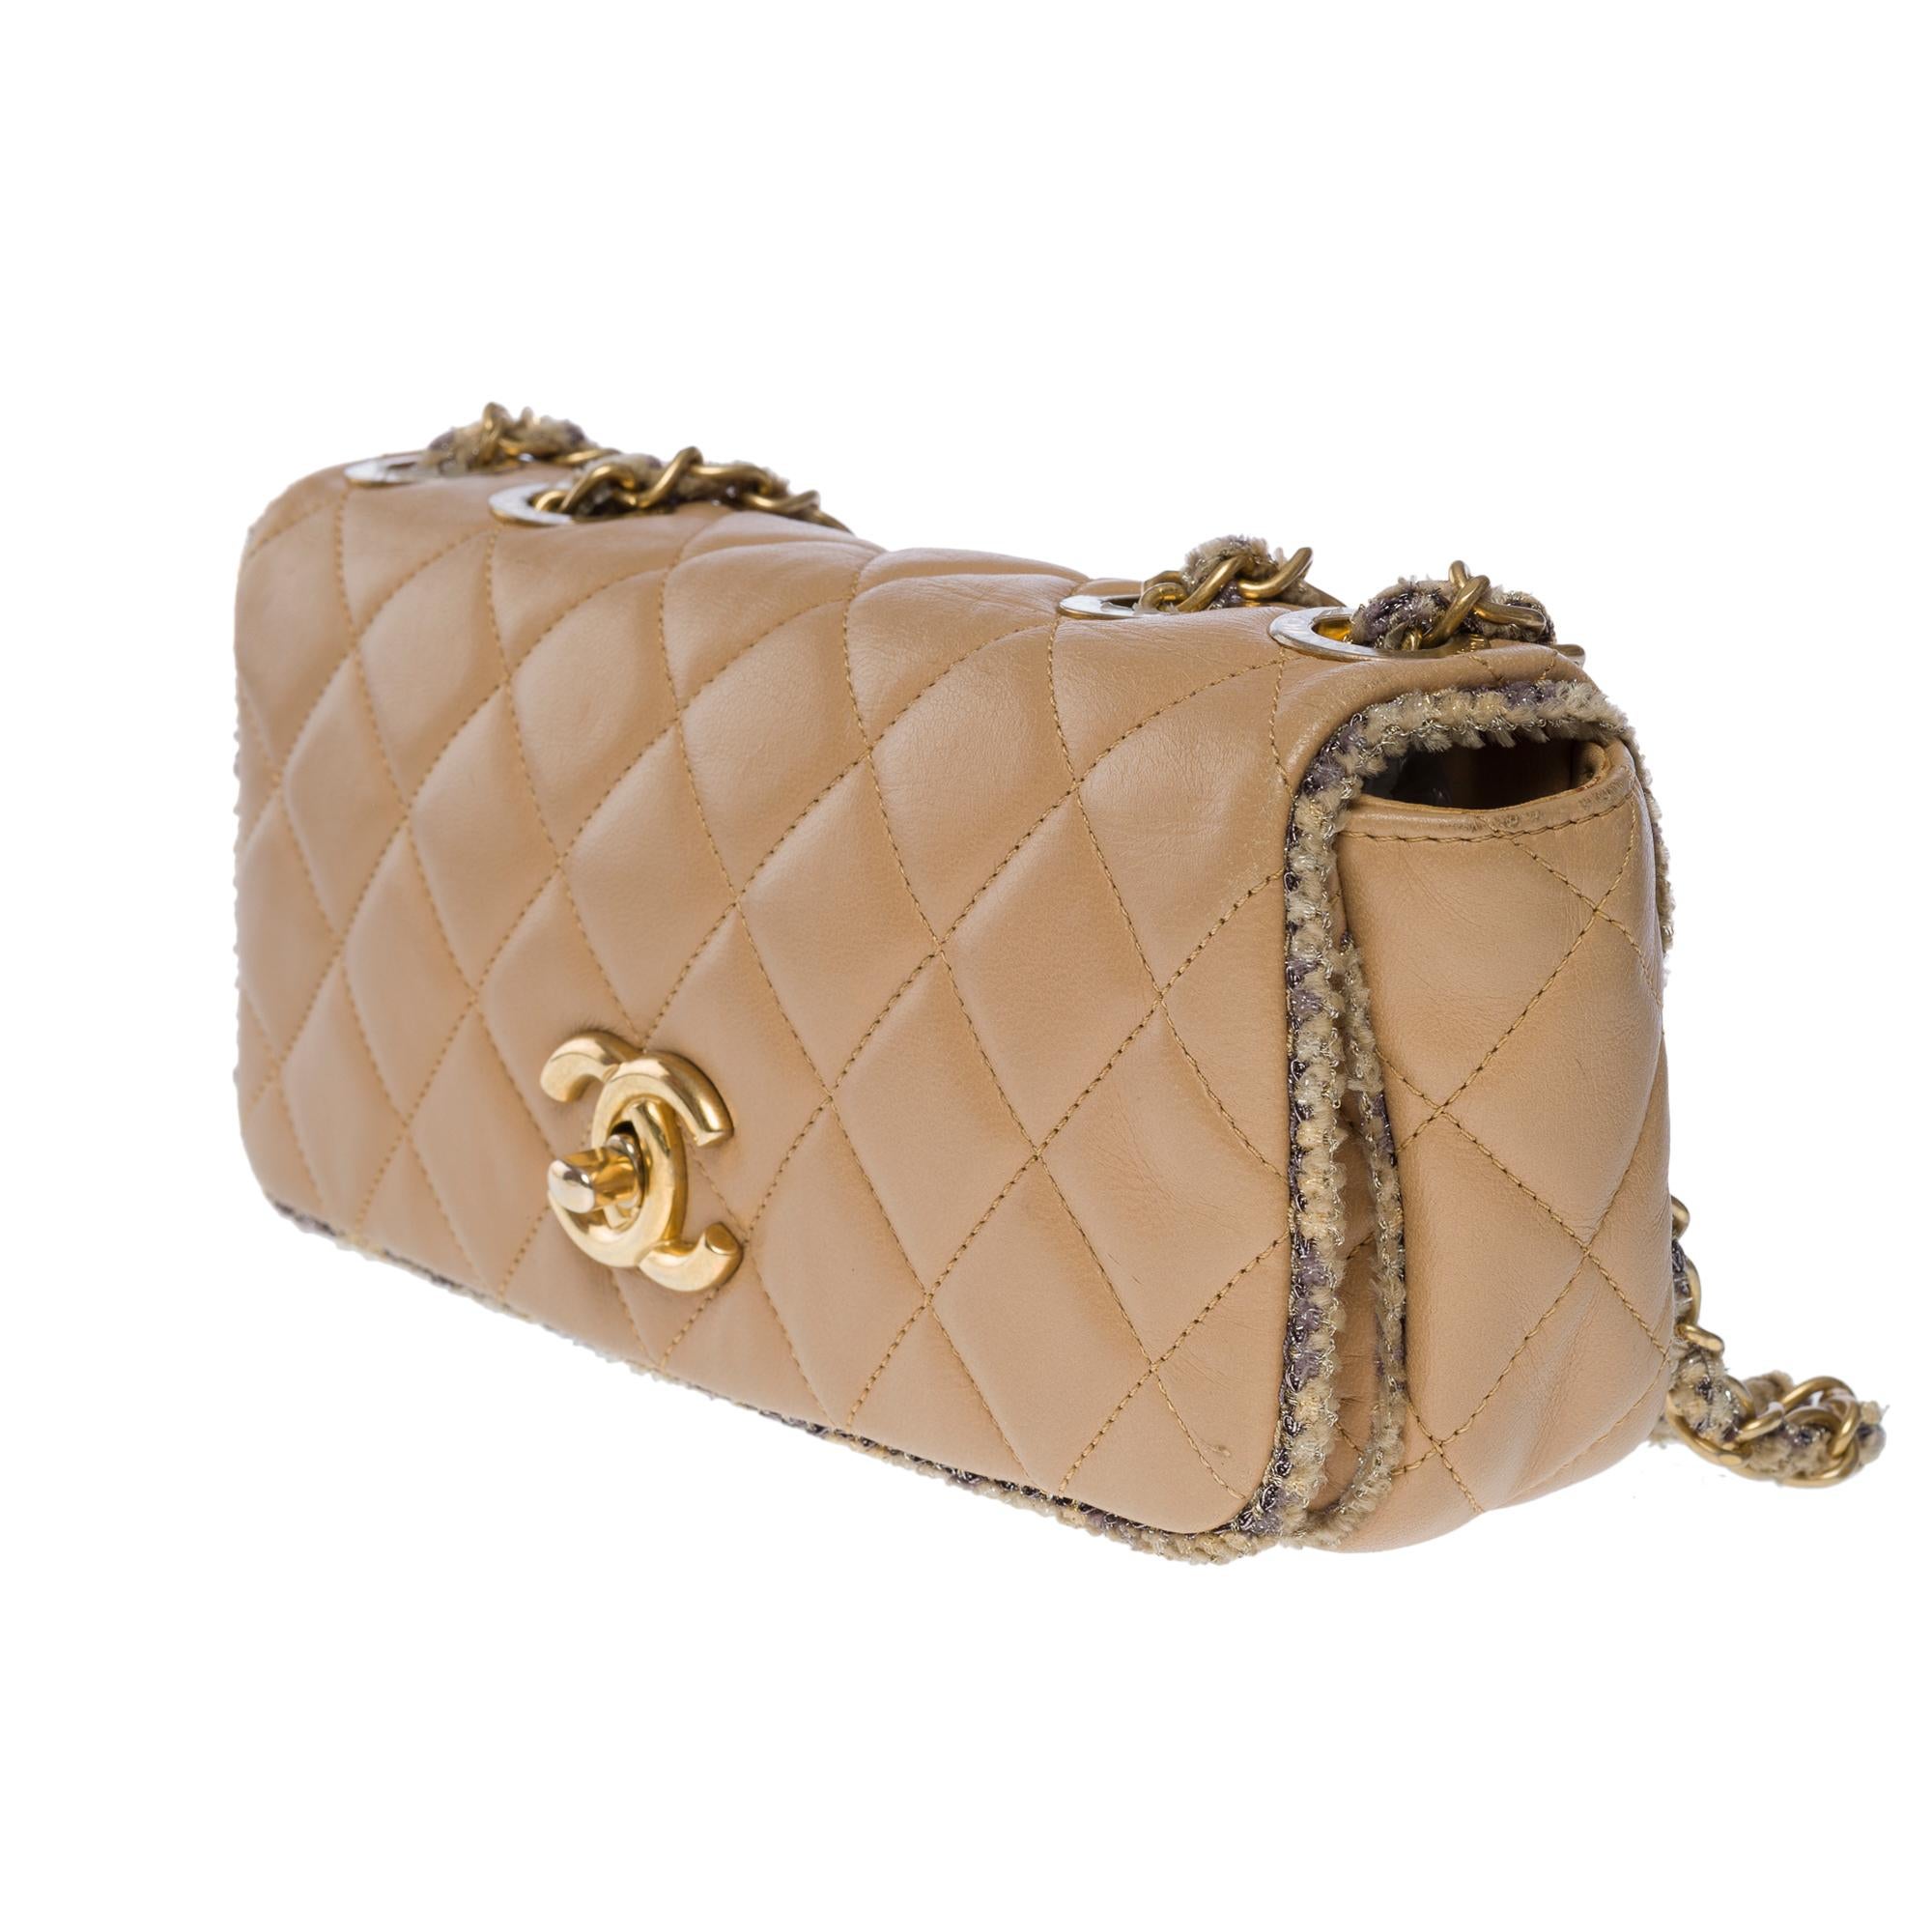 Women's Rare limited edition Chanel Full flap shoulder bag in beige quilted lambskin, GHW For Sale